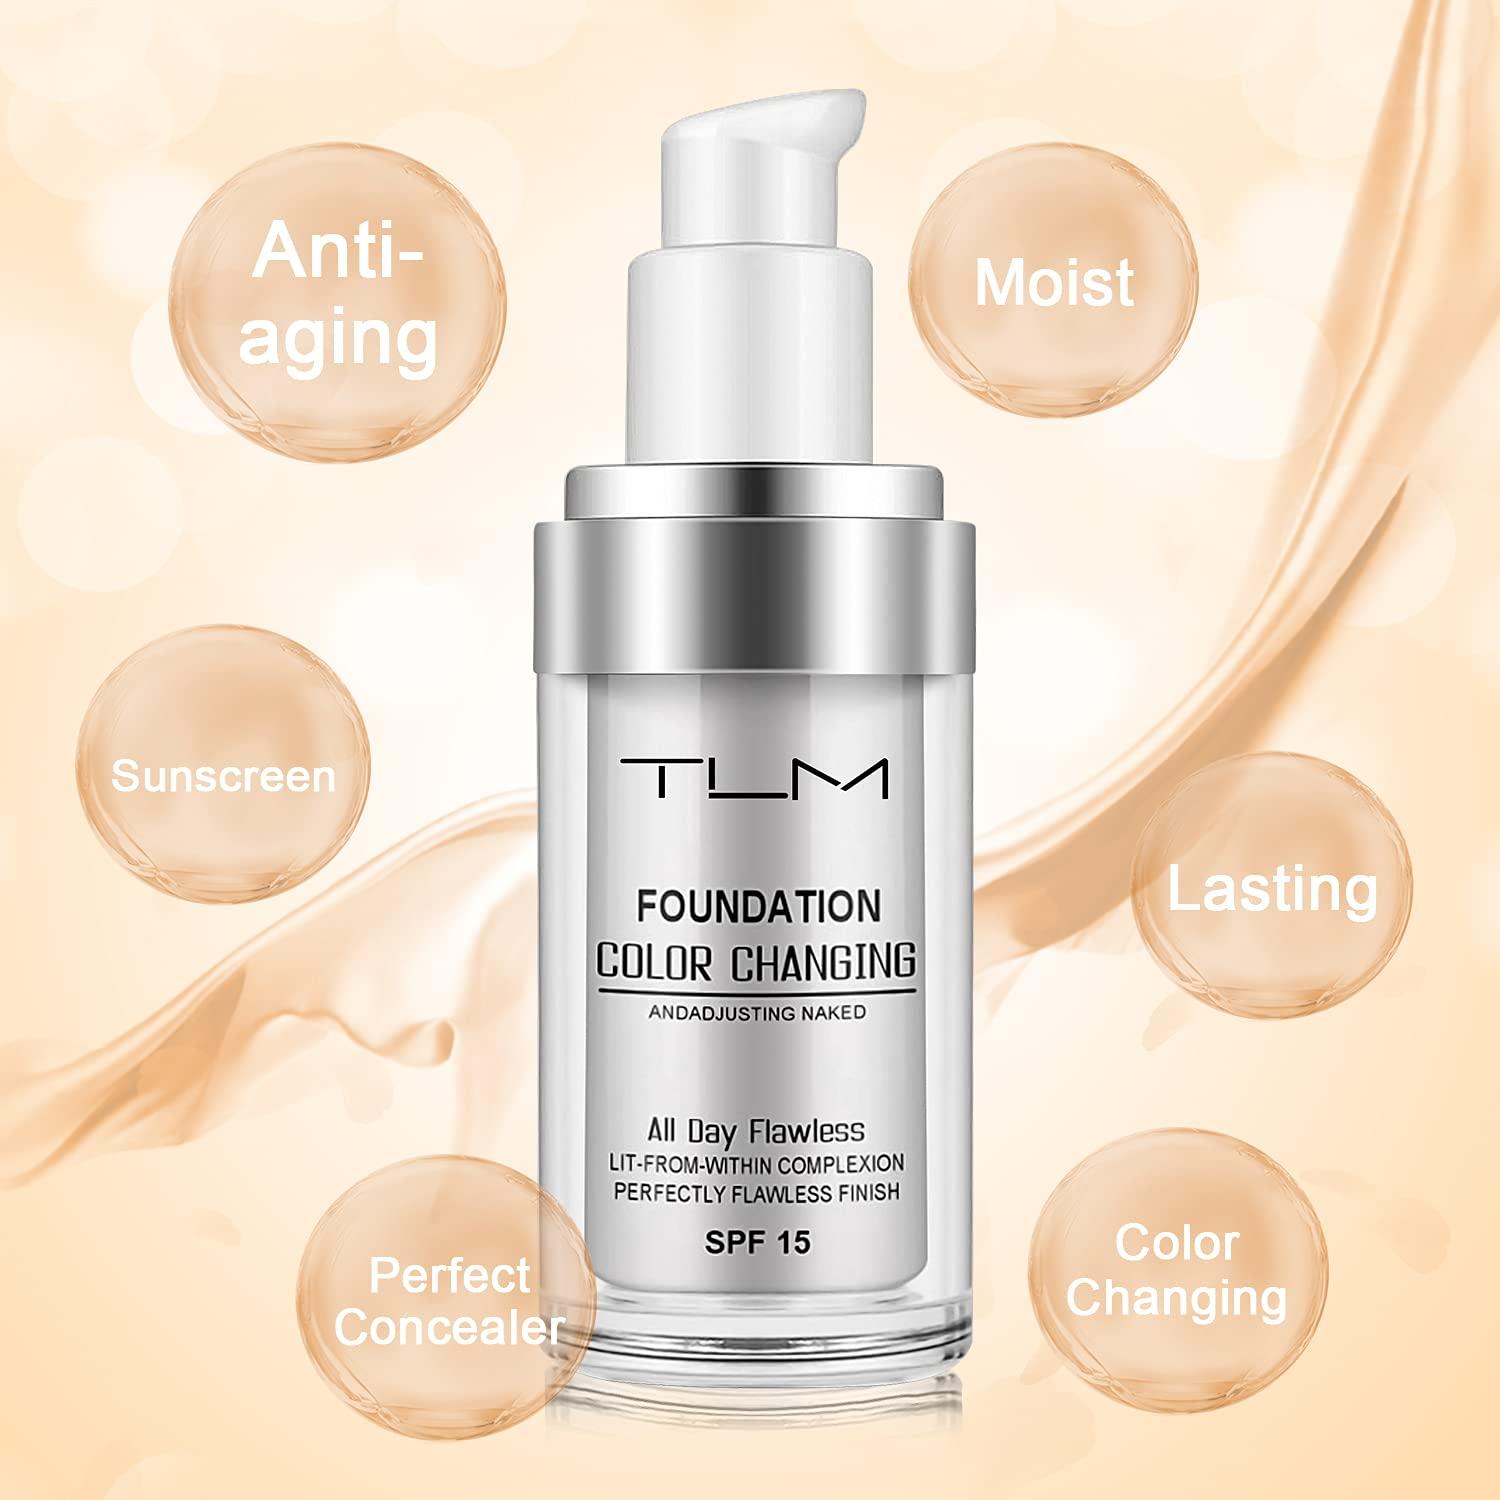  30ml TLM Flawless Color Changing Liquid Foundation Makeup  Change To Your Skin Tone By Just Blending : Beauty & Personal Care